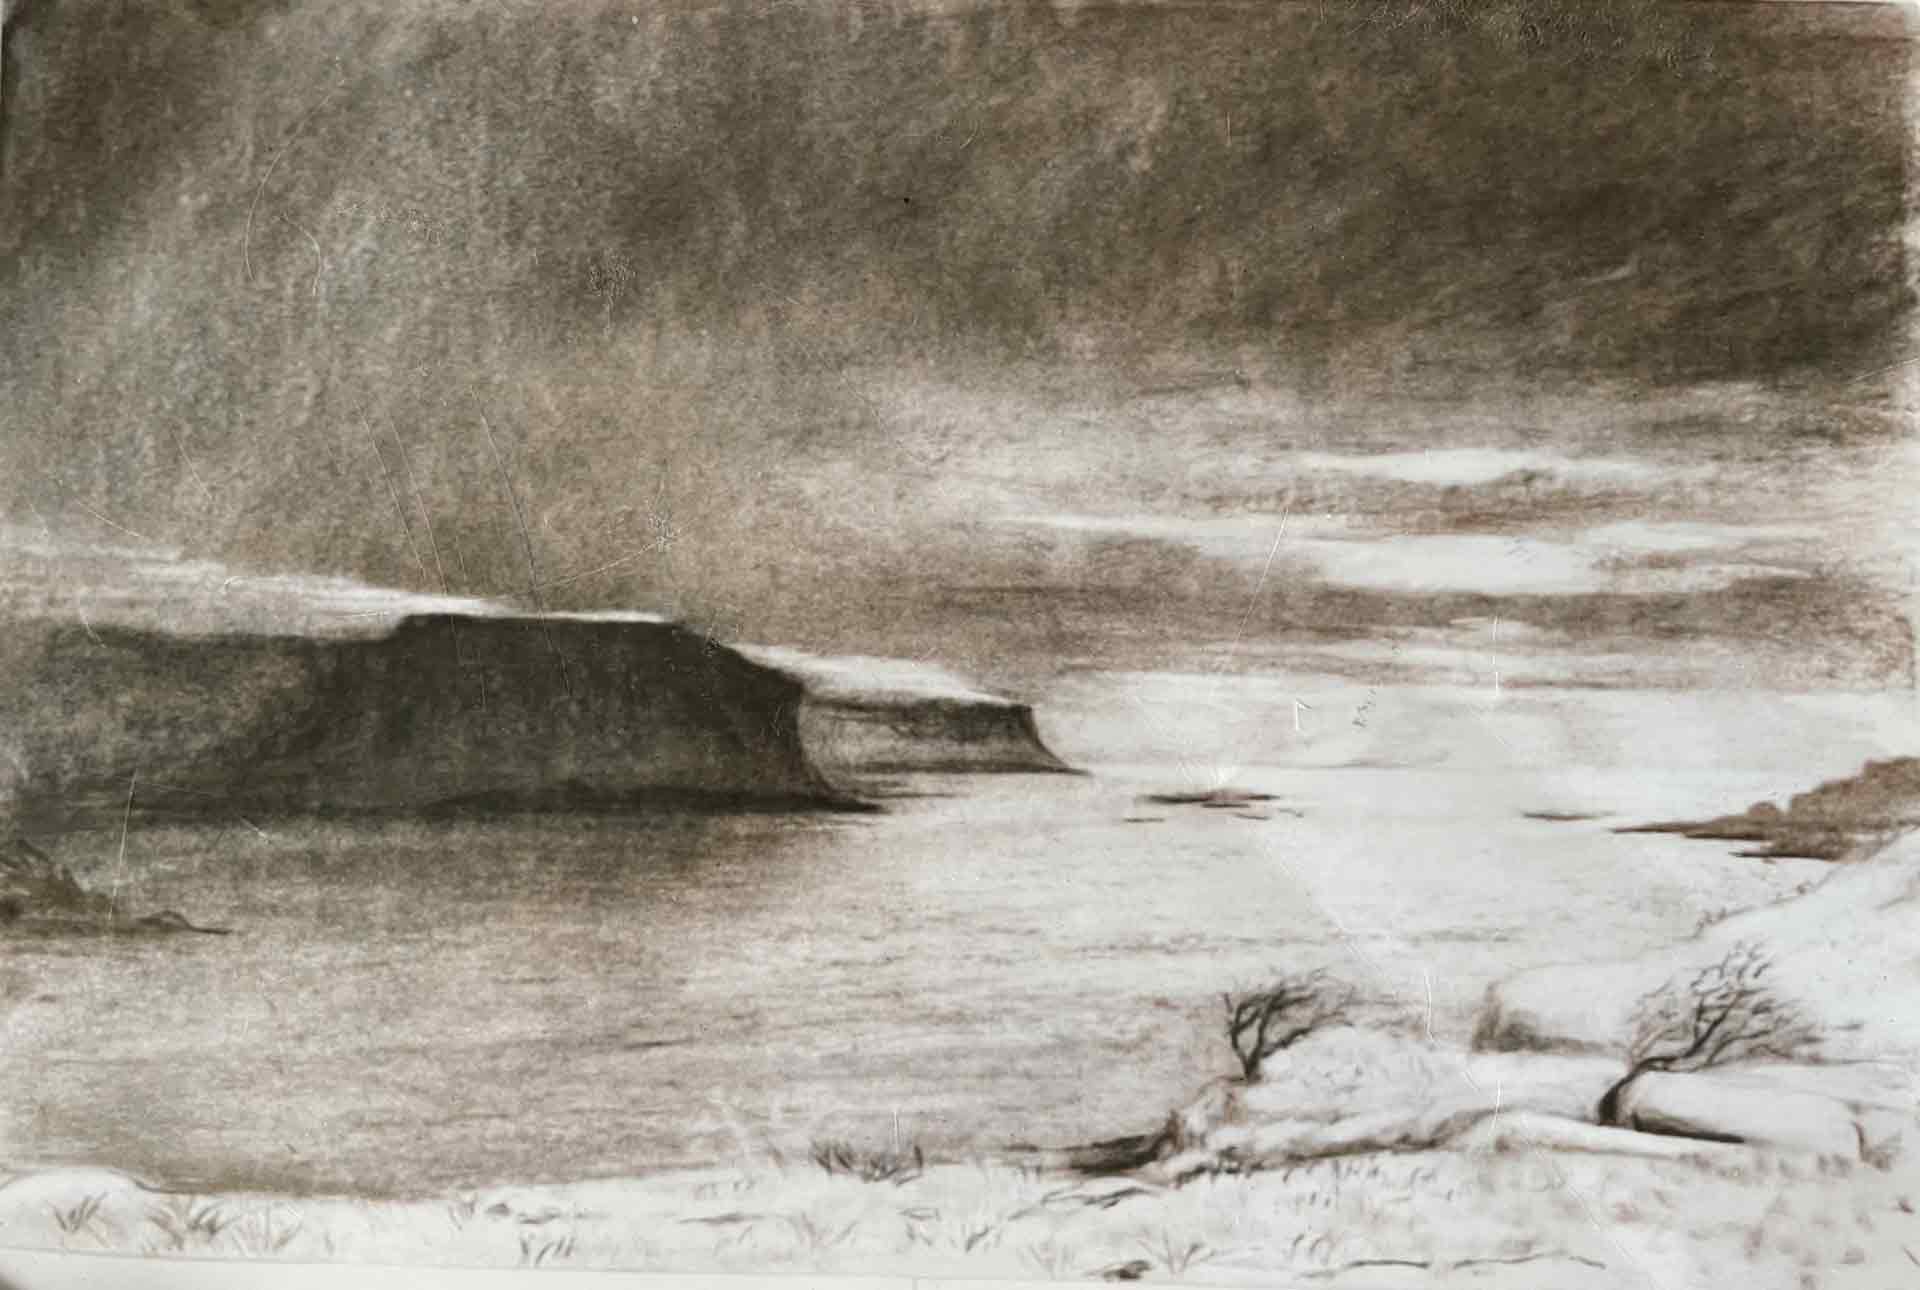 Grubin Cliffs In The Snow, Isle Of Mull. Charcoal Drawing oby Victoria Orr Ewing